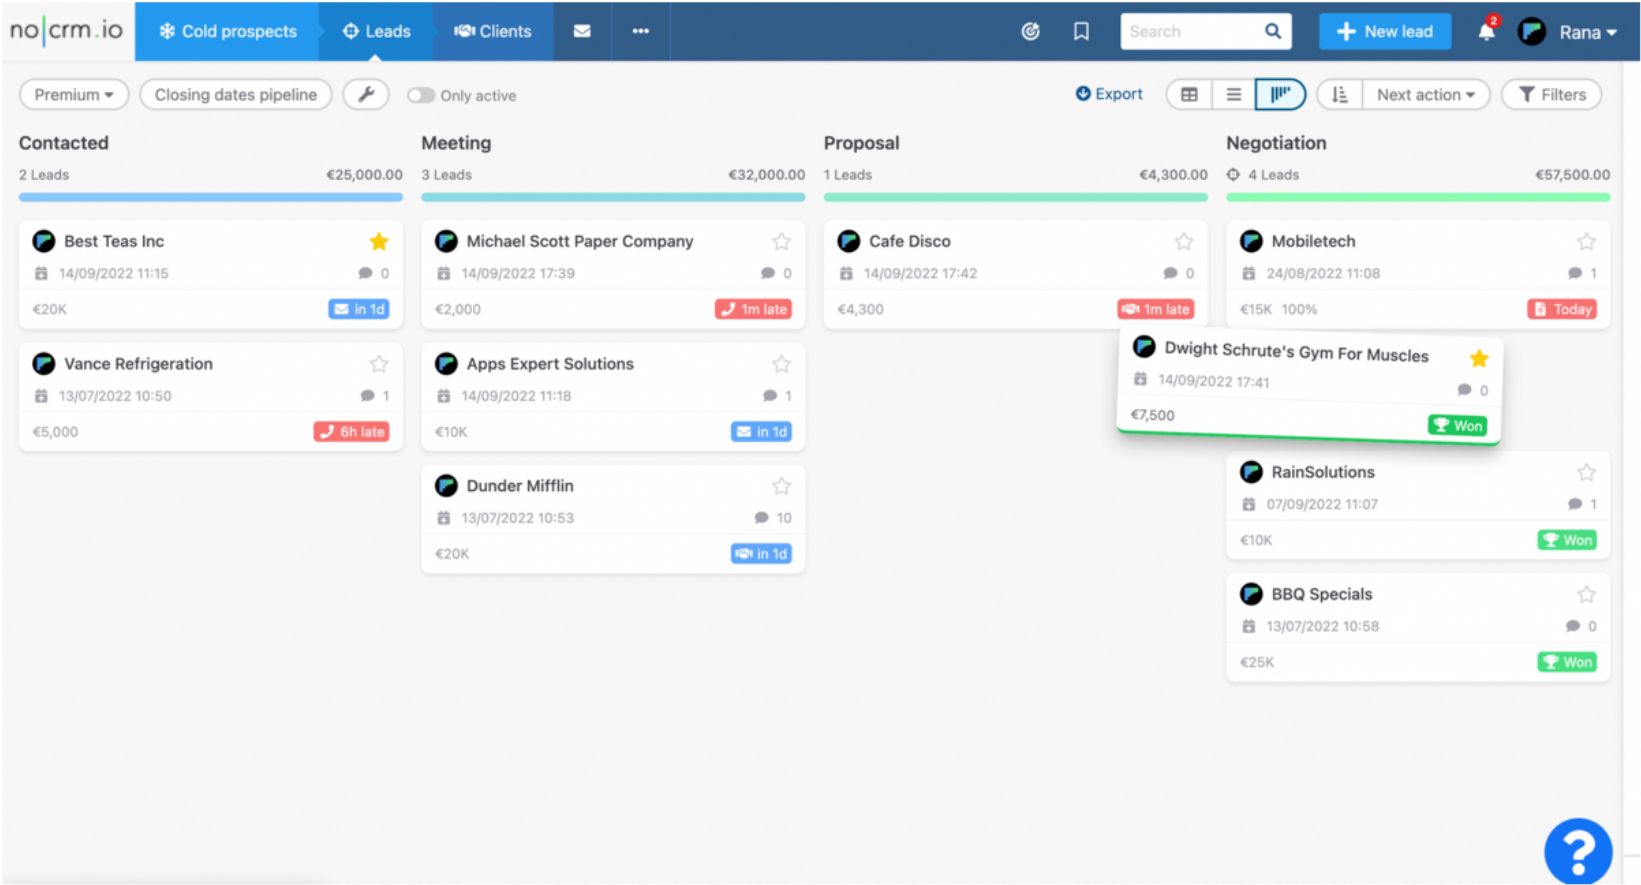 A sales pipeline example in noCRM